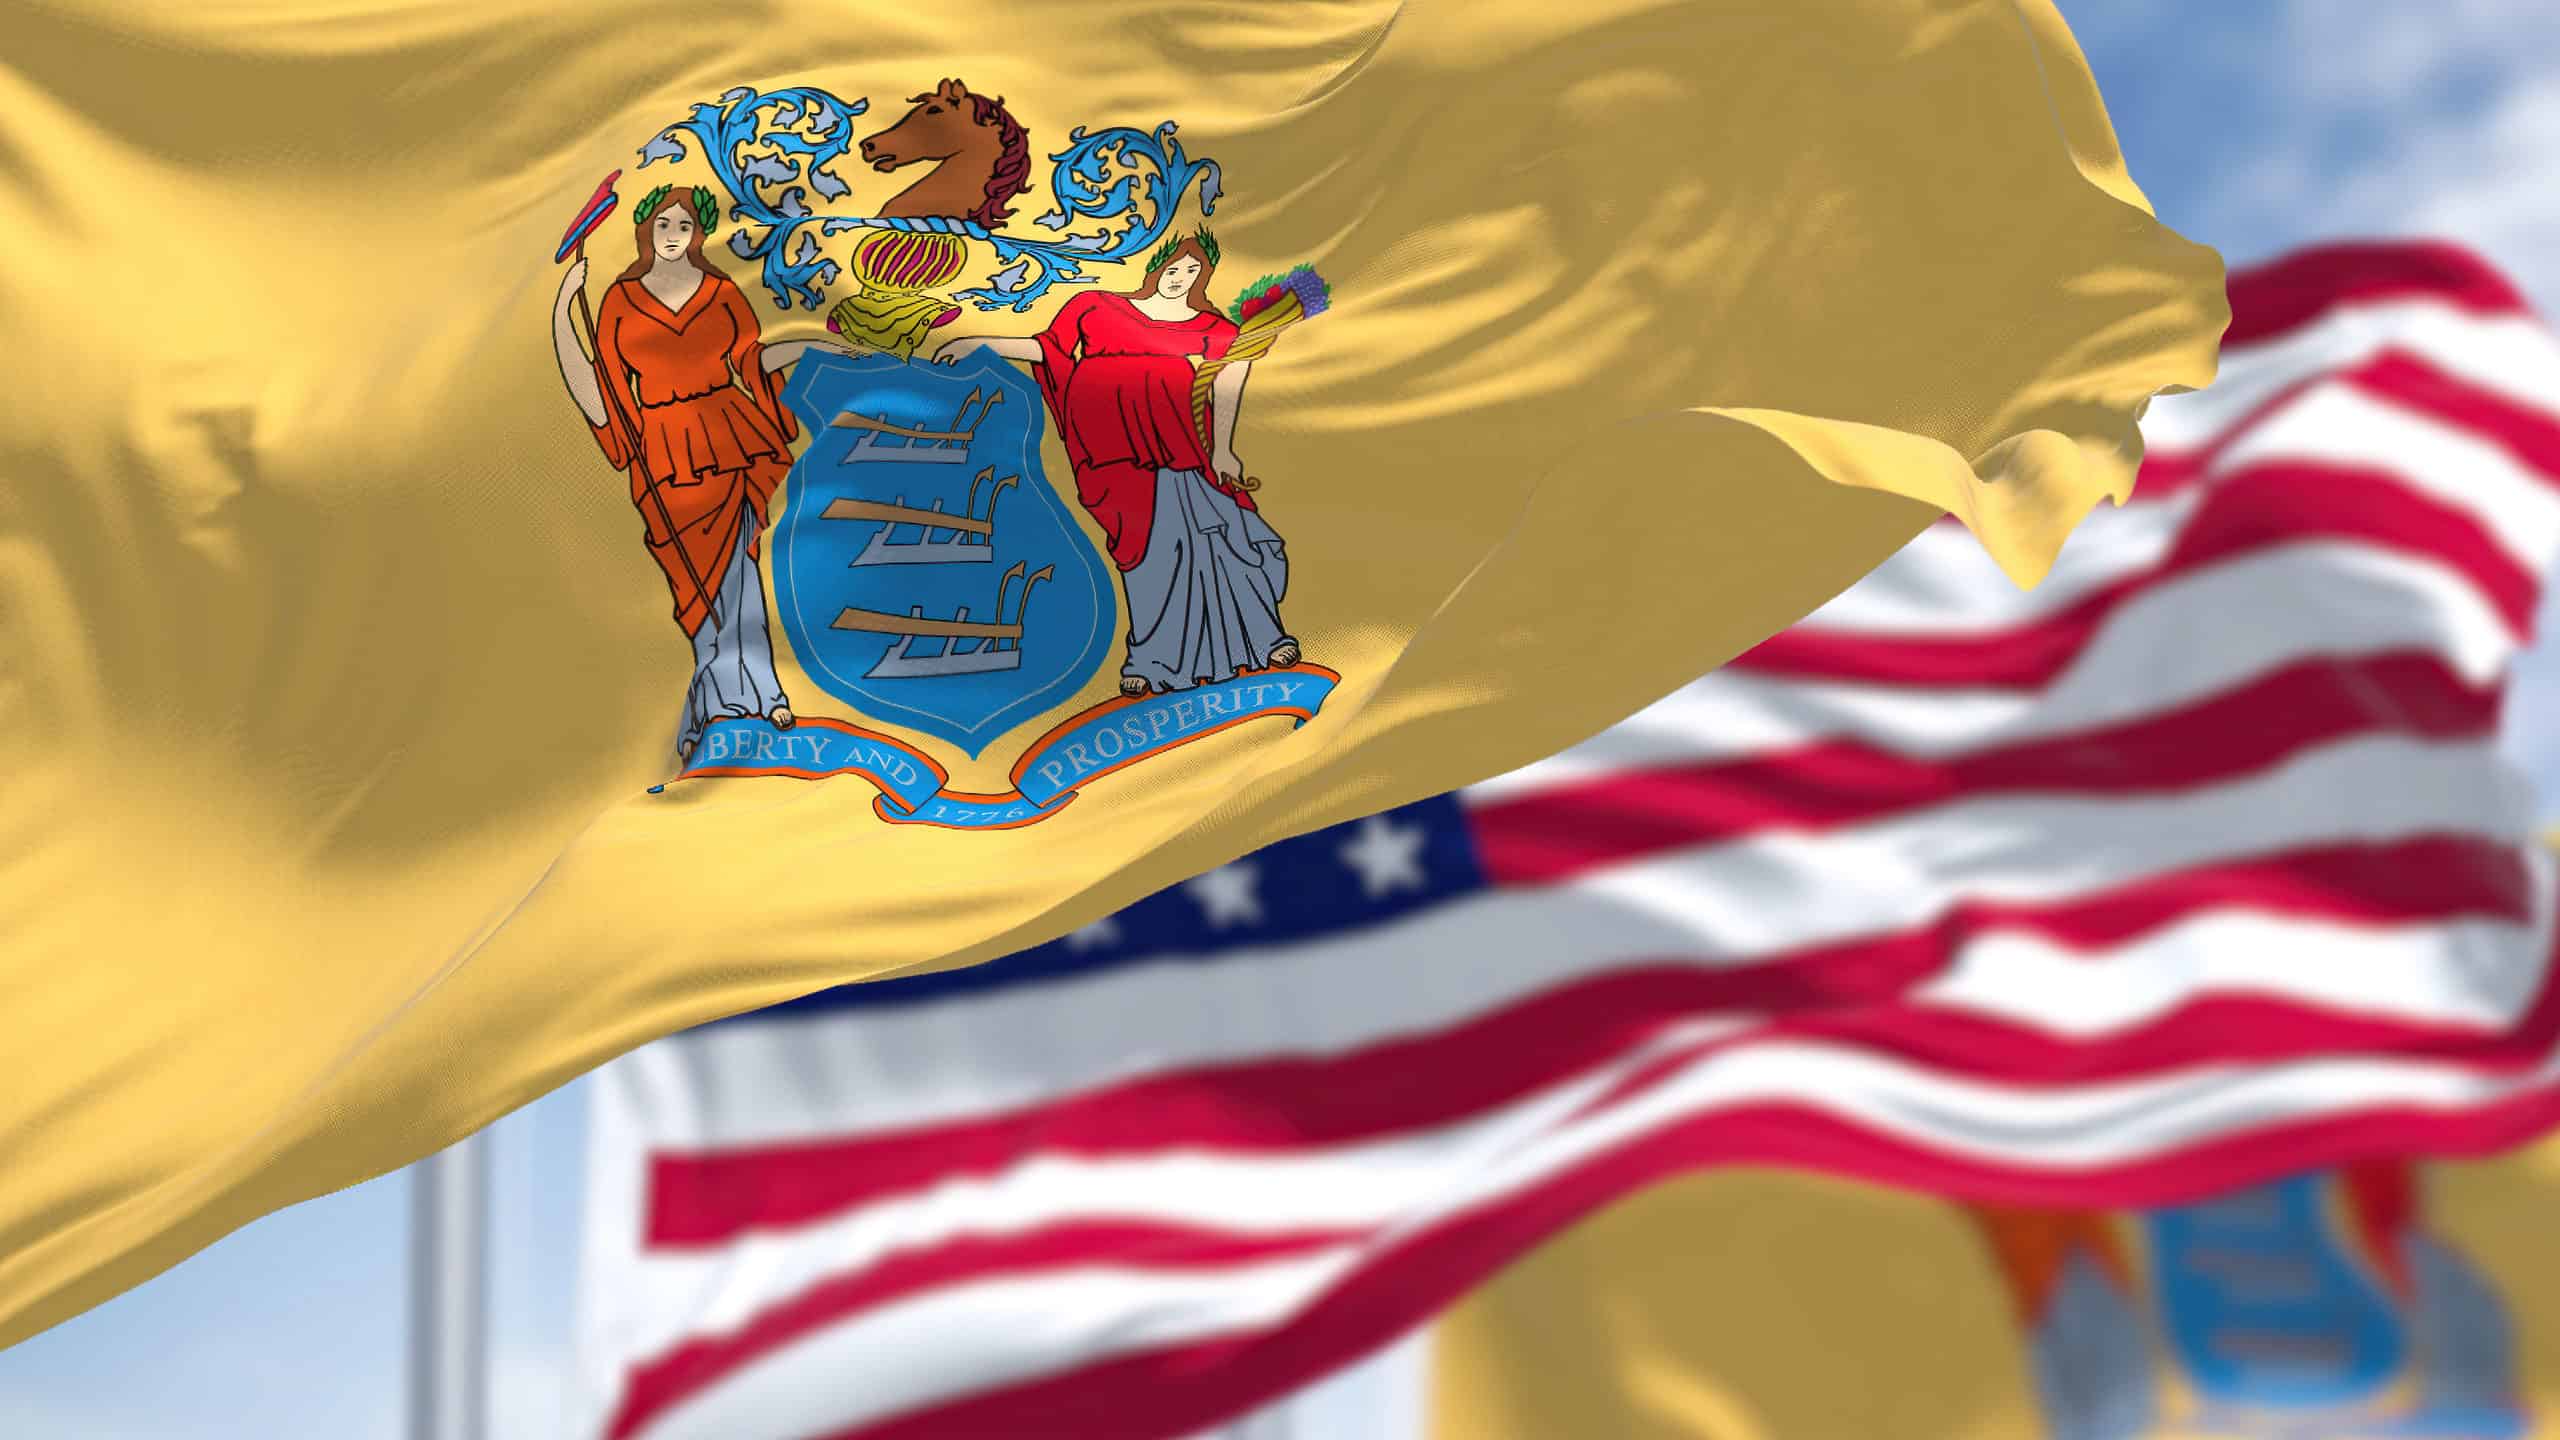 The New Jersey state flag waving along with the national flag of the United States of America